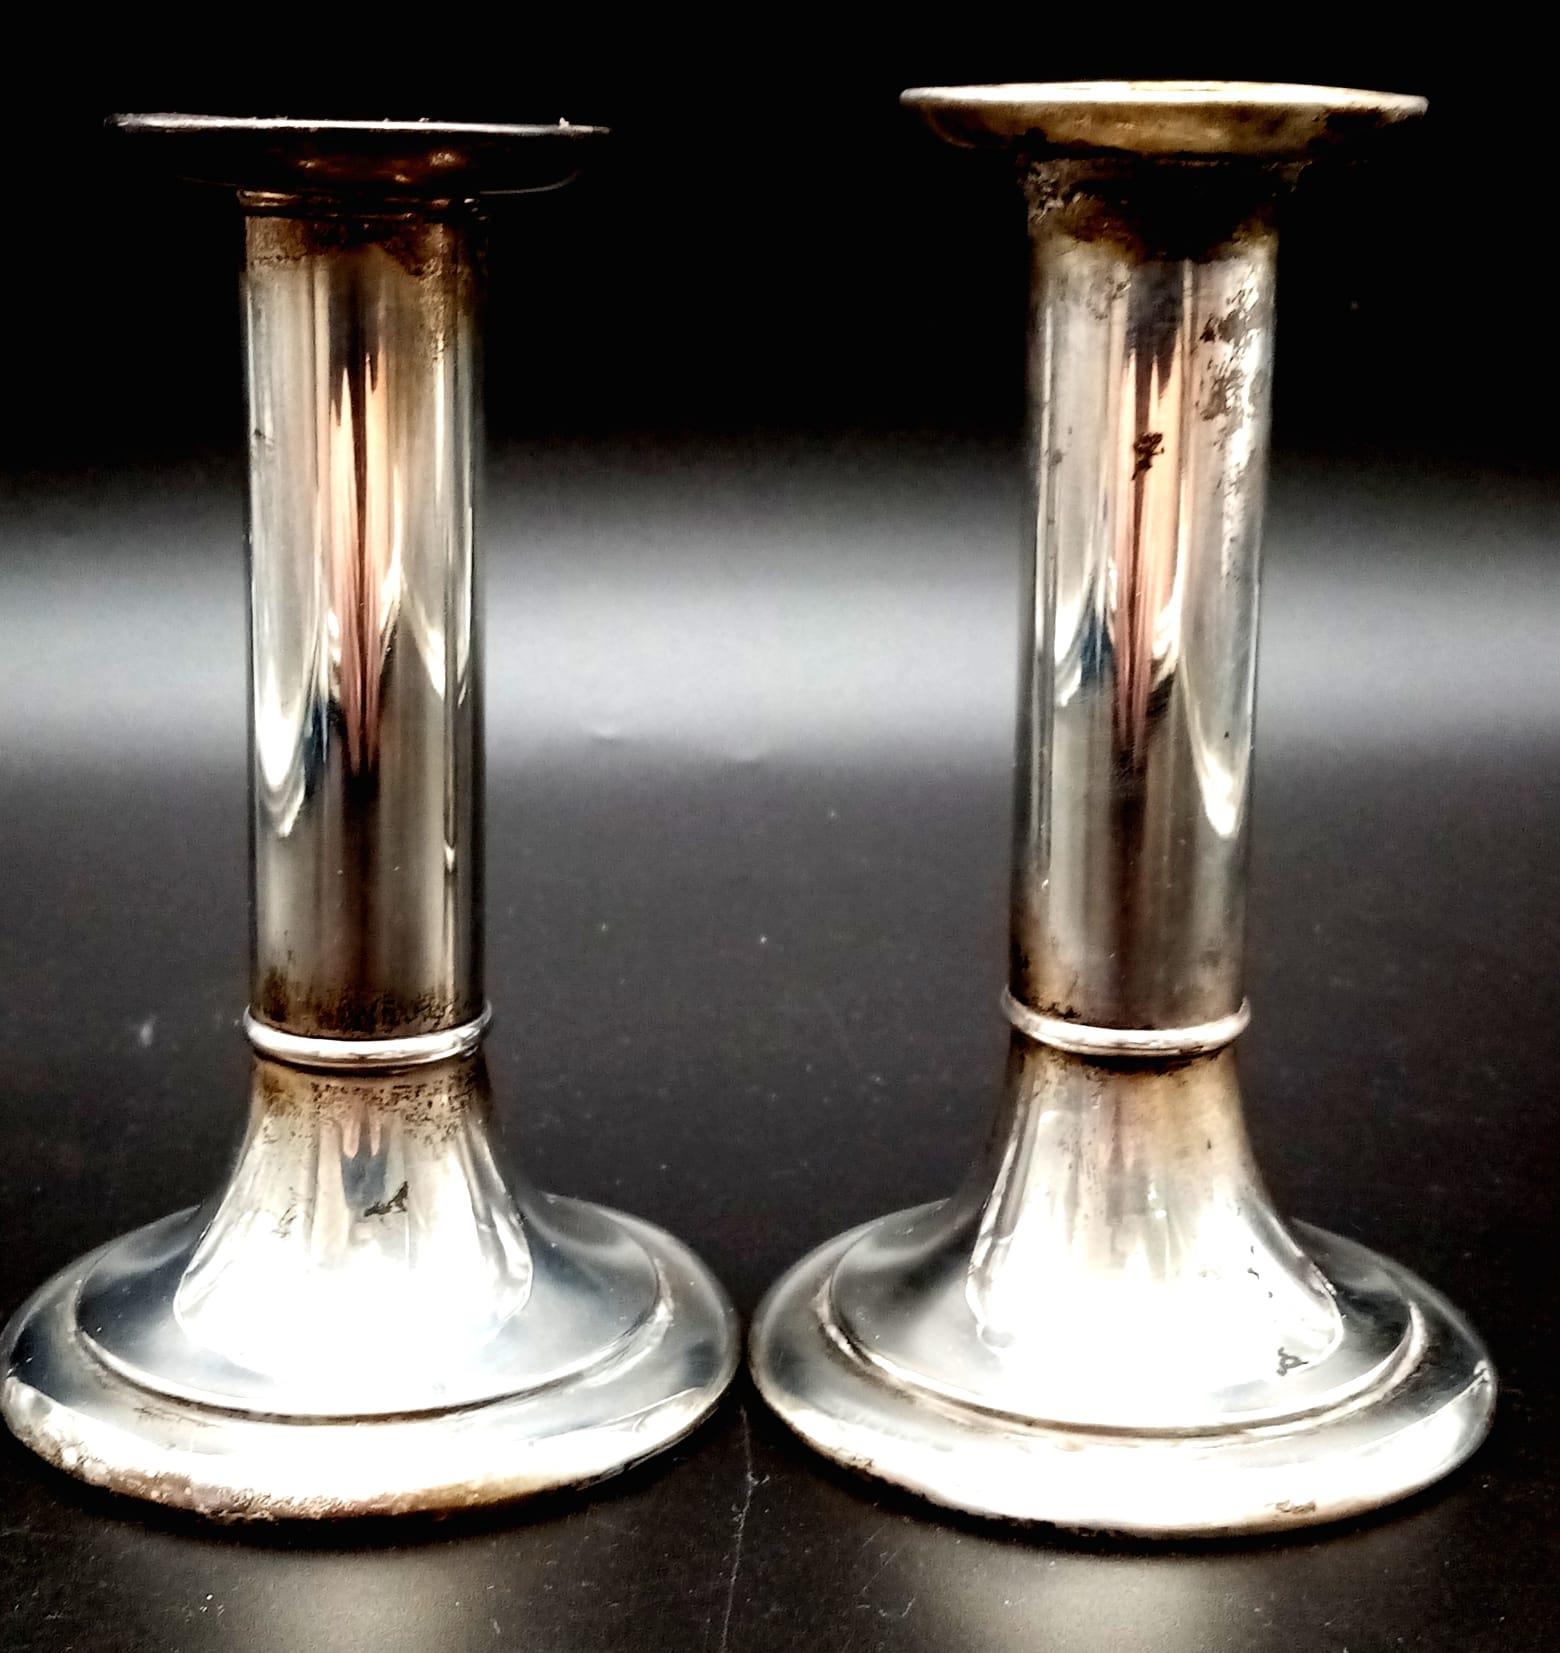 A Pair Of Vintage 925 Silver Small Tiffany and Co Candlesticks. Issue numbers - 16752 - 9575. 13cm